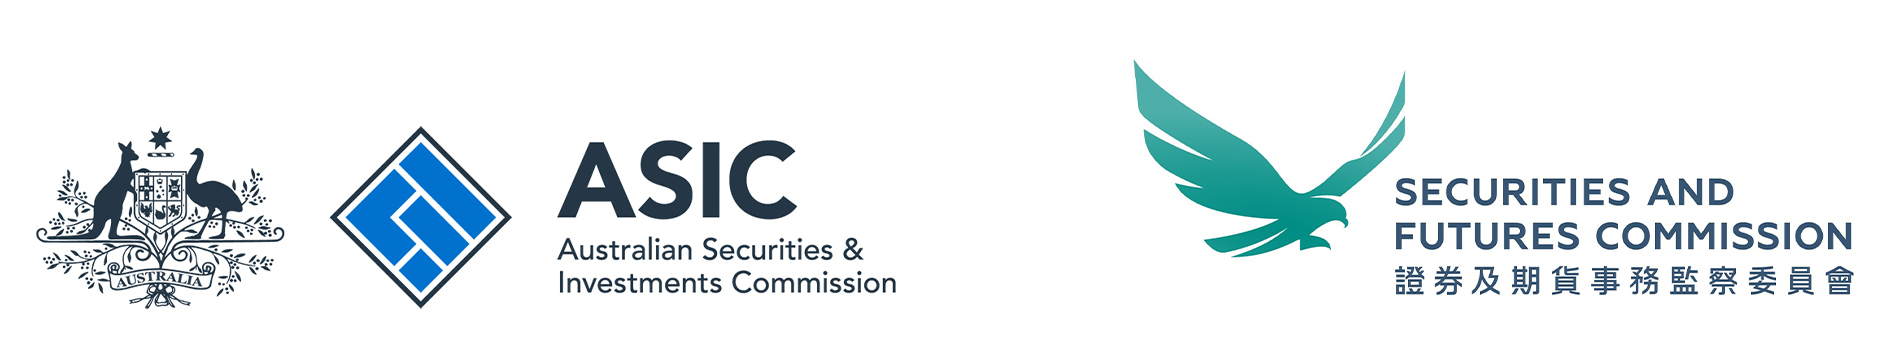 ASIC and Securities and Futures Commission (SFC) logos